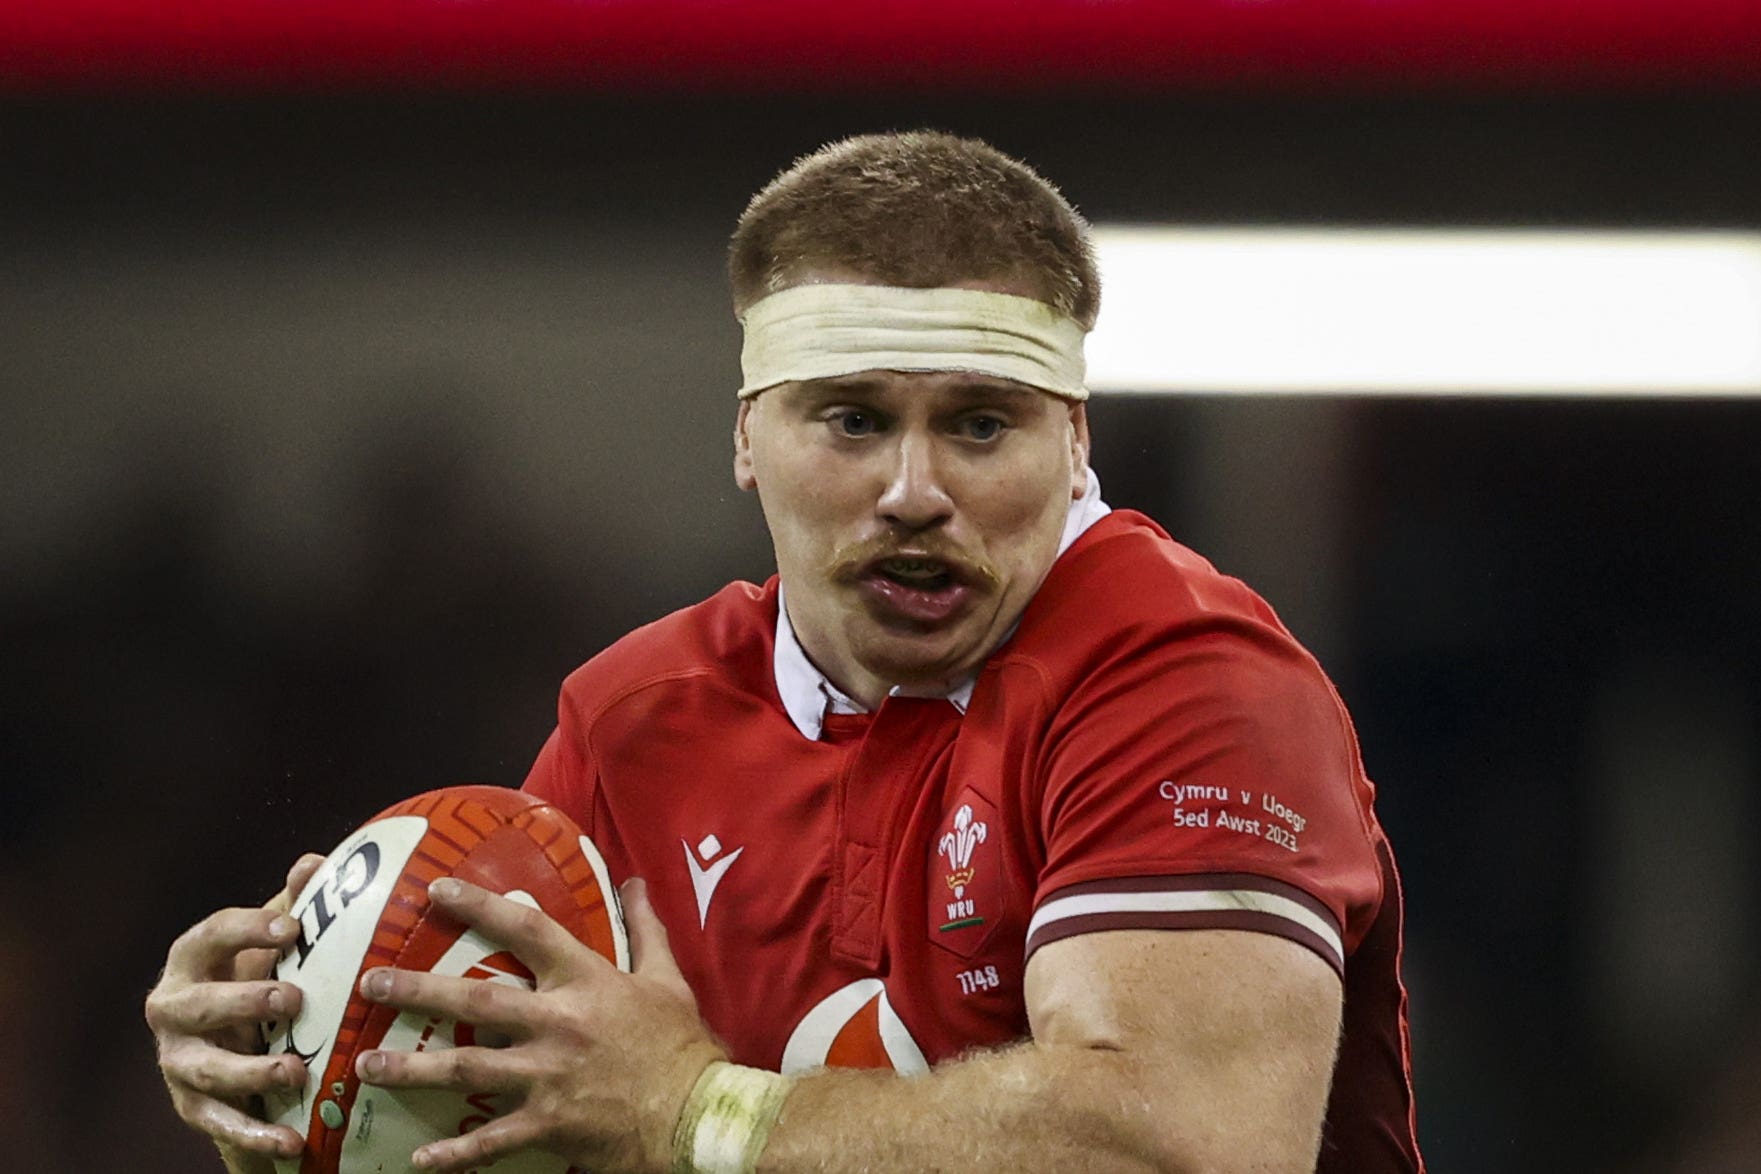 Aaron Wainwright will be a key performer for Wales against Italy (Ben Whitley/PA)